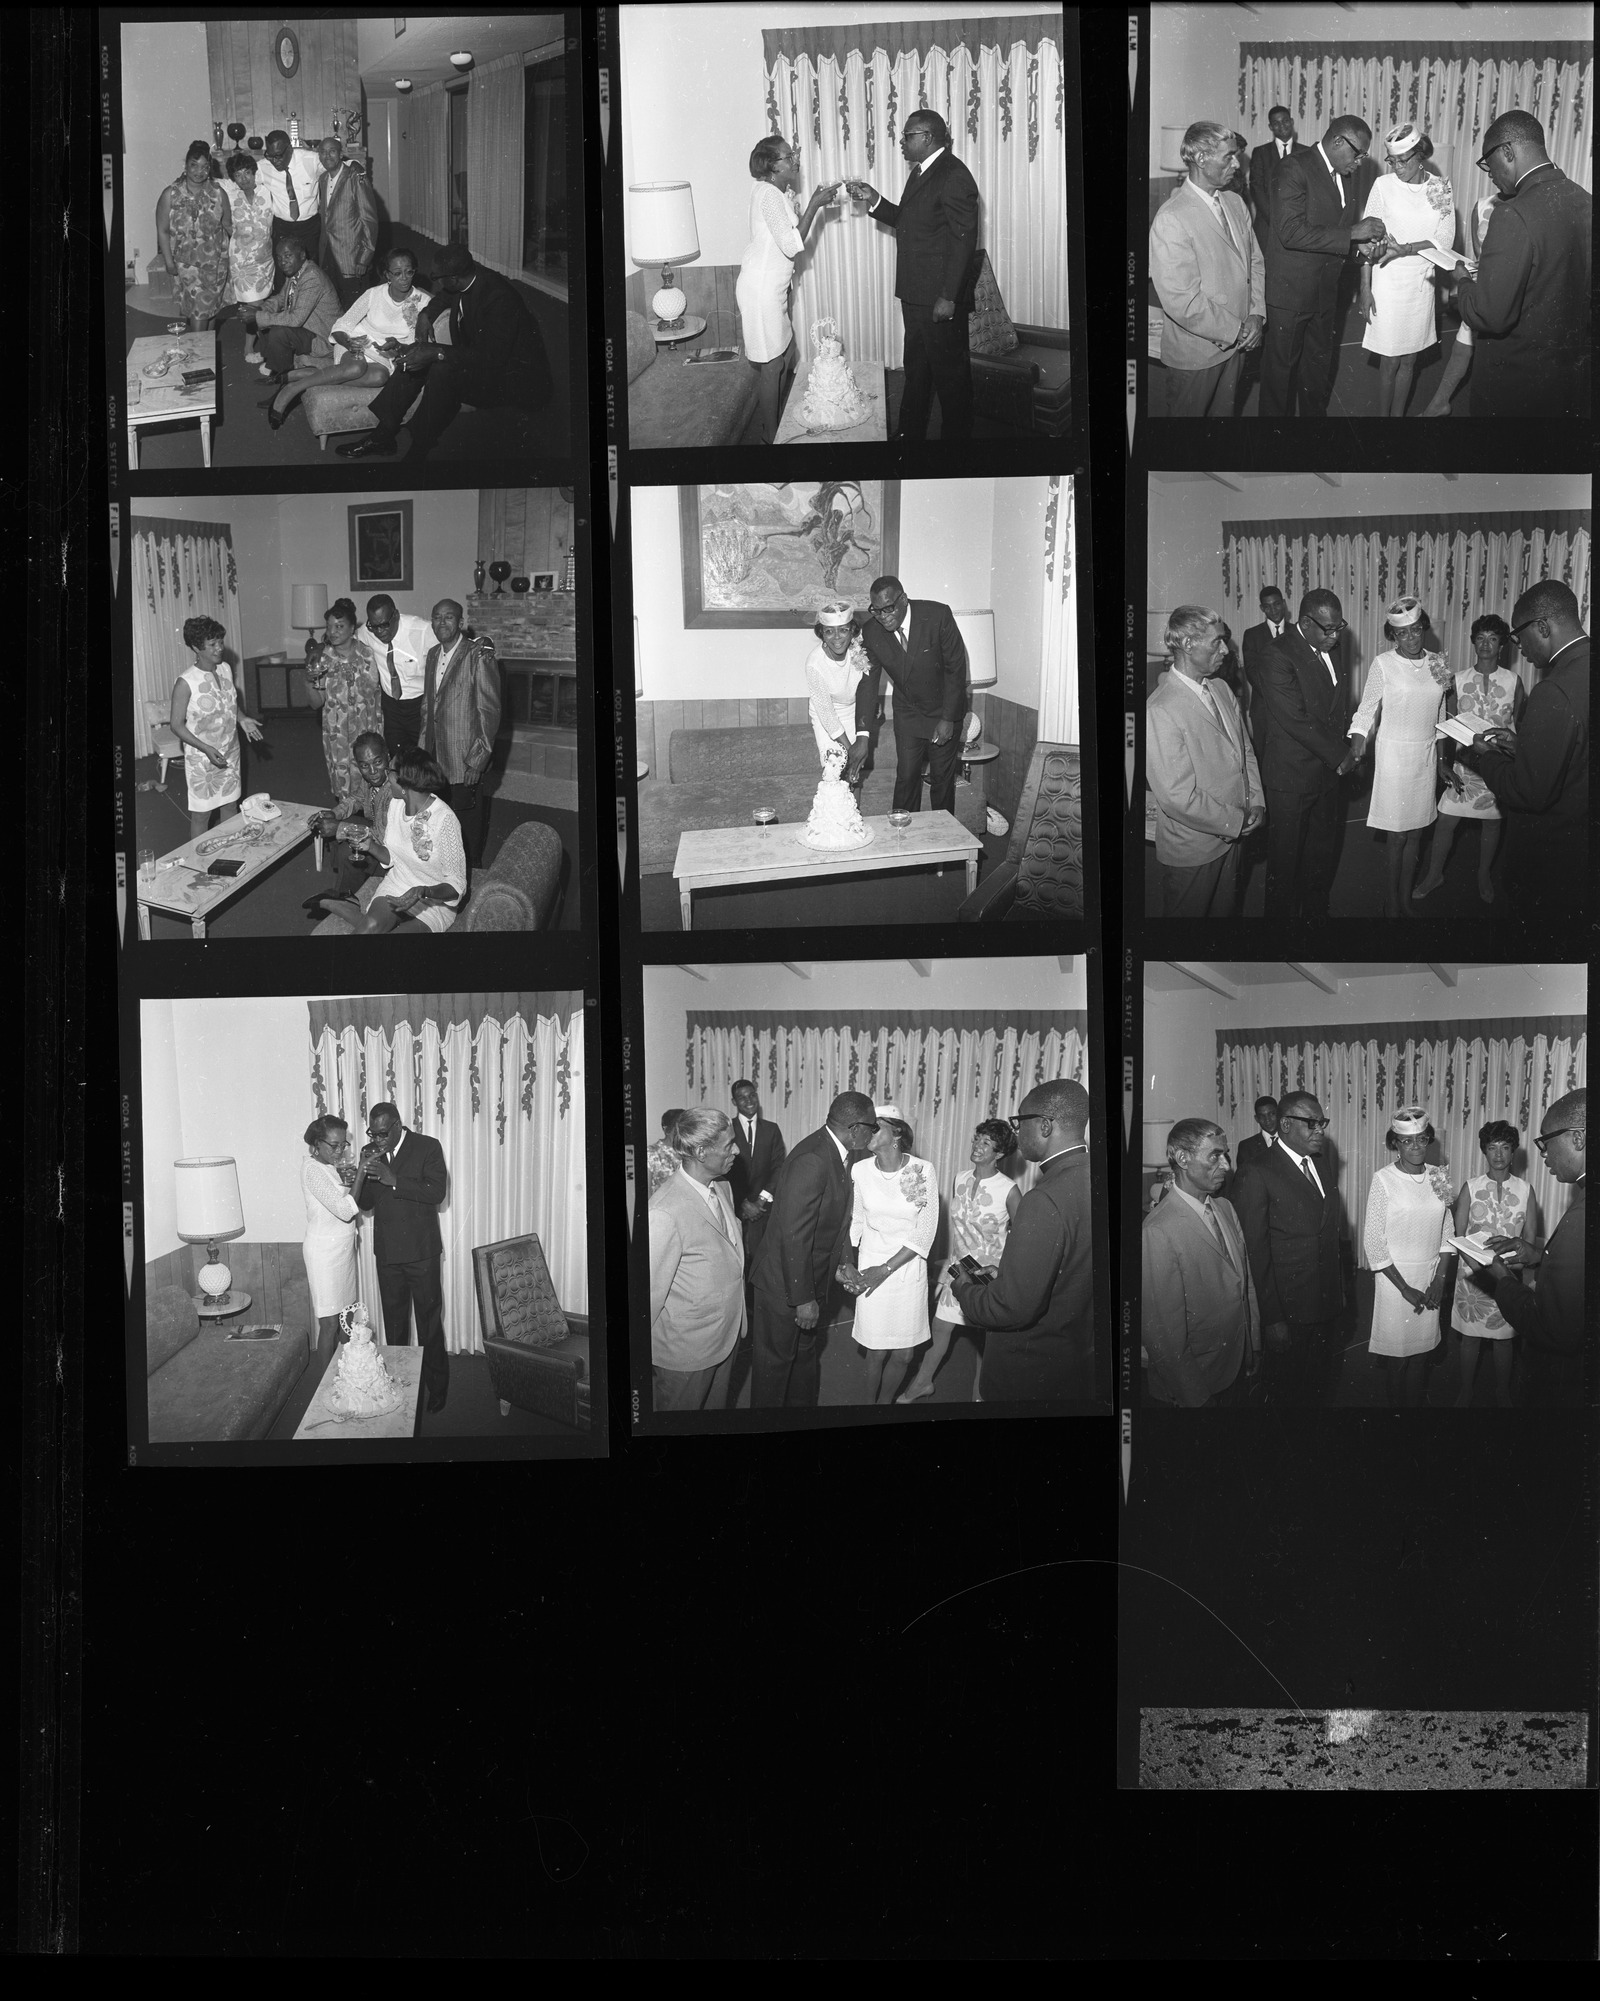 Set of negatives by Clinton Wright of a wedding celebration, 1968, page 2